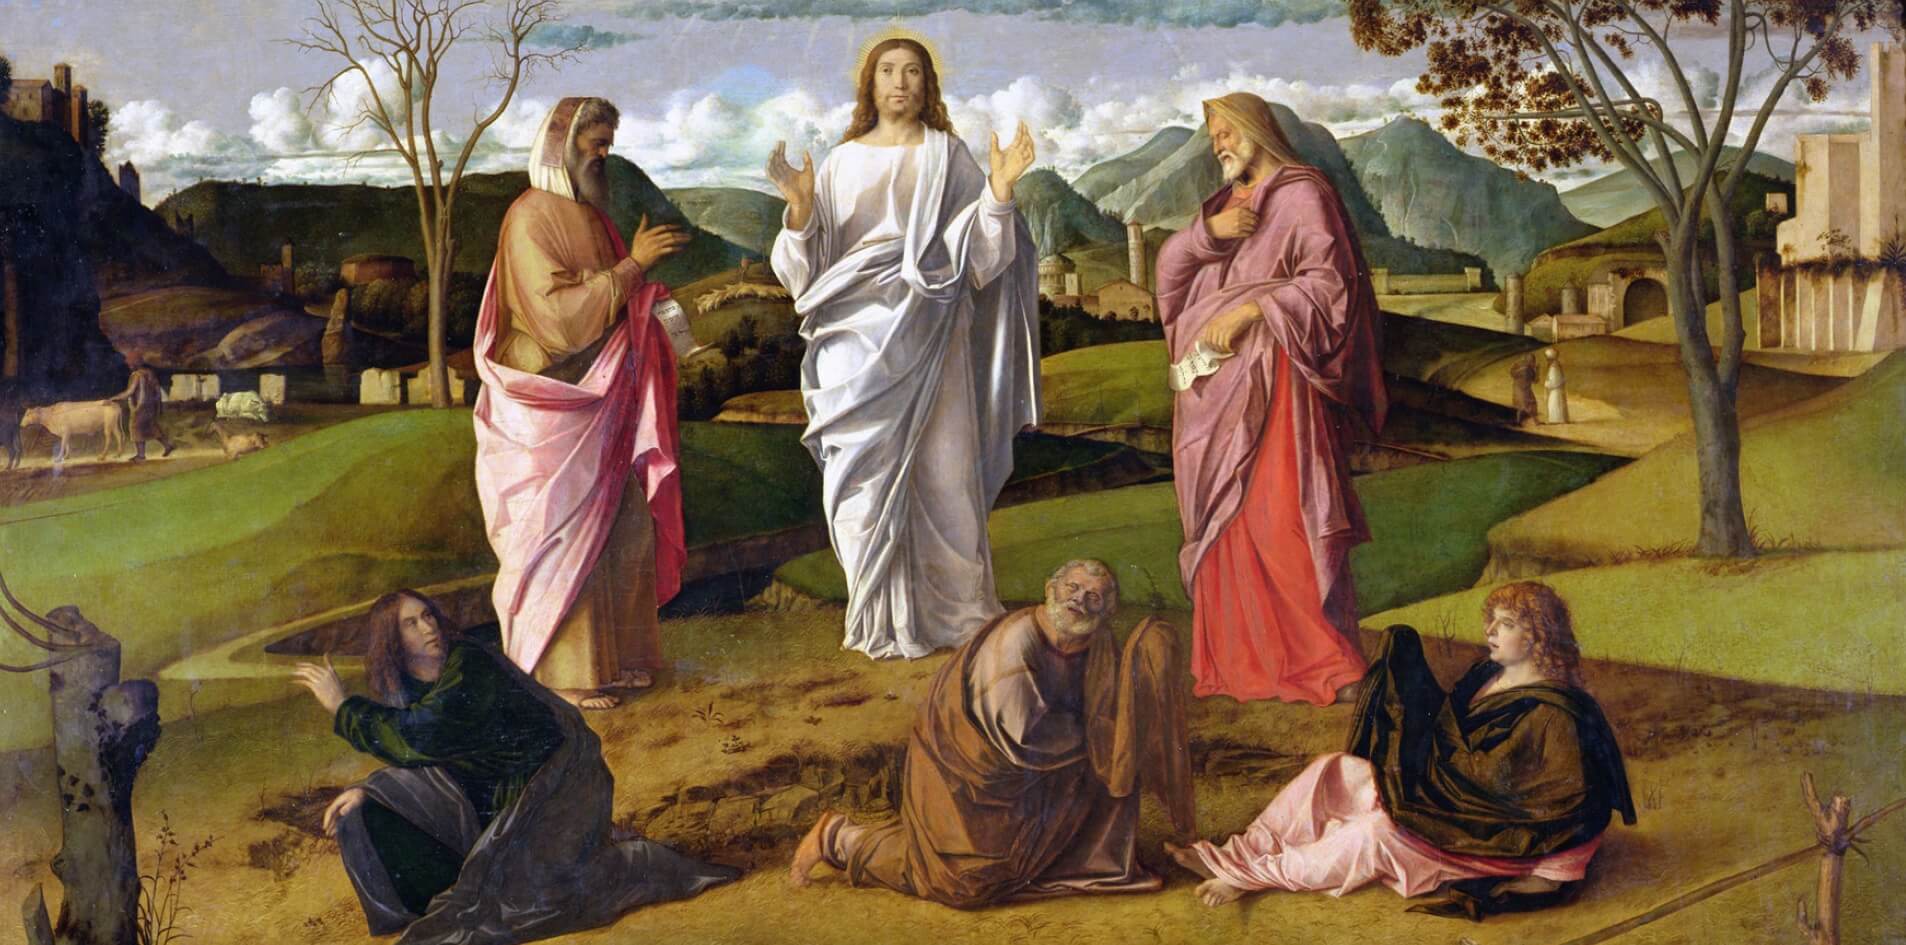 The Transfiguration of the Lord: A Divine Encounter